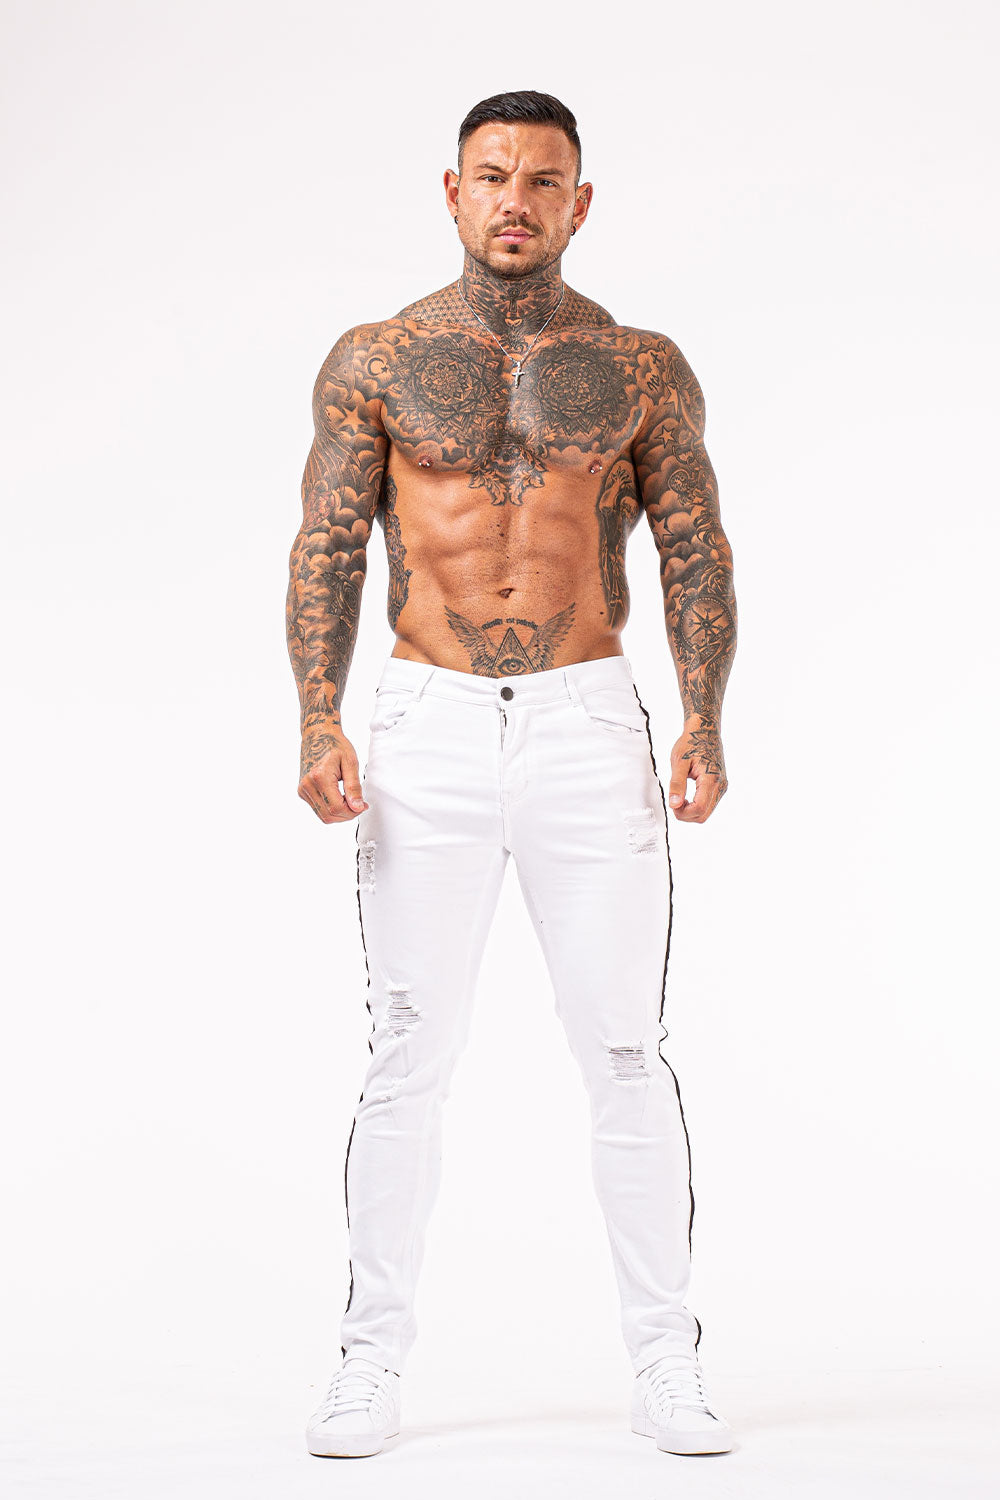 Men Skinny Ripped Jeans Distressed-White Stretch Jeans